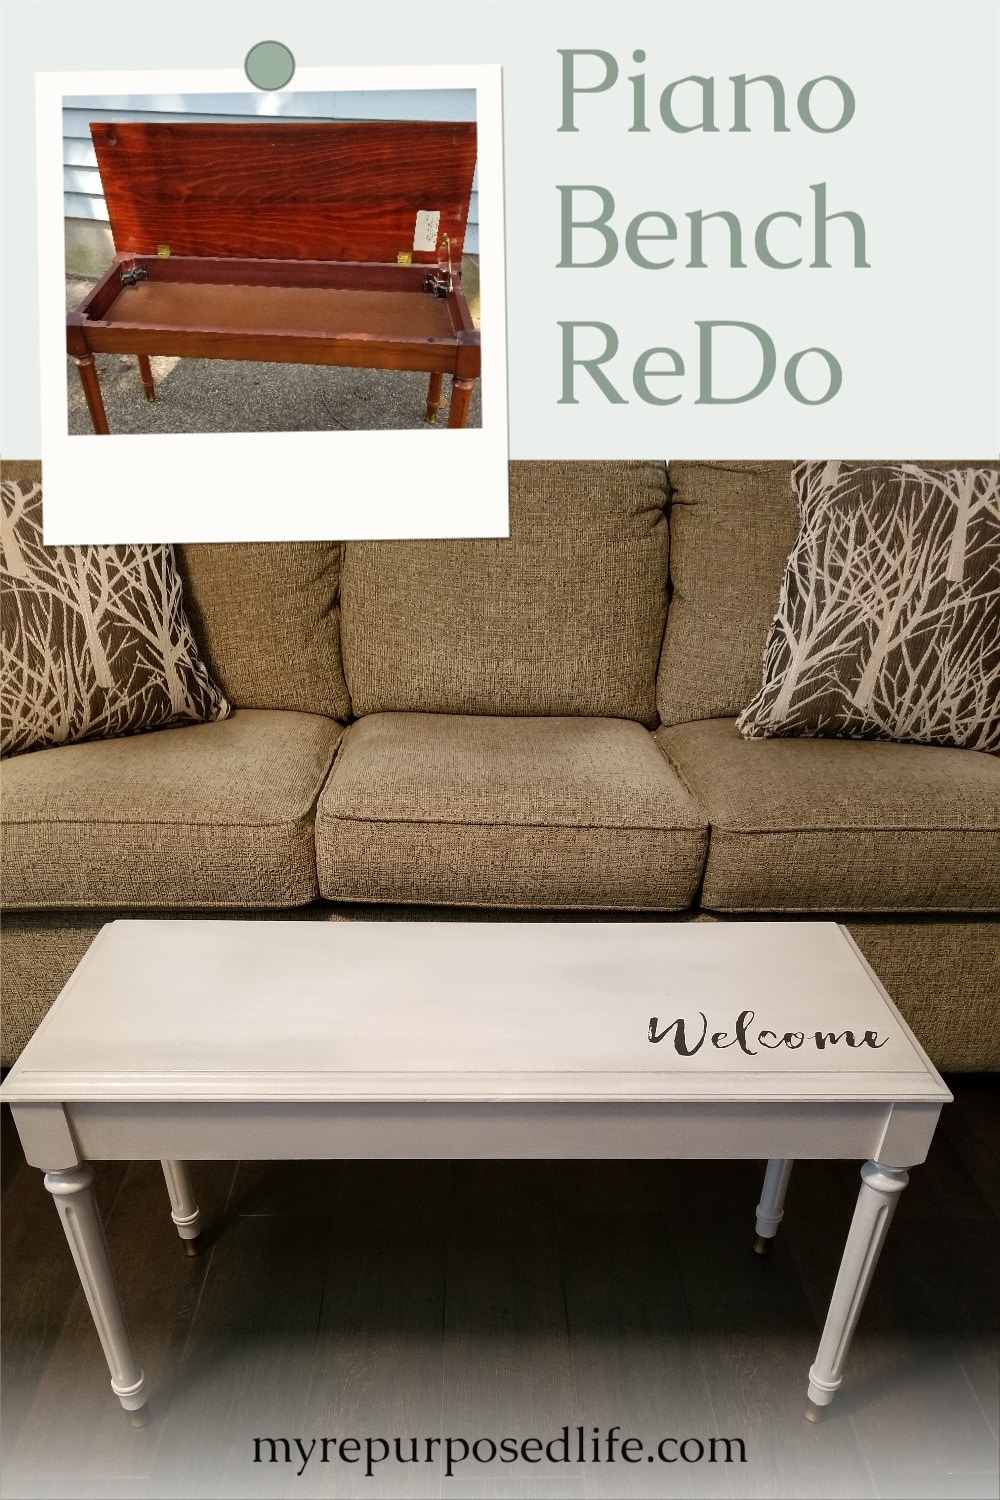 Easy piano bench redo with a little paint, glaze and a Chalk Couture transfer. This quick and easy piano bench makeover tutorial gives all the steps needed. #MyRepurposedLife #repurposed #upcycled #furniture #pianobench via @repurposedlife